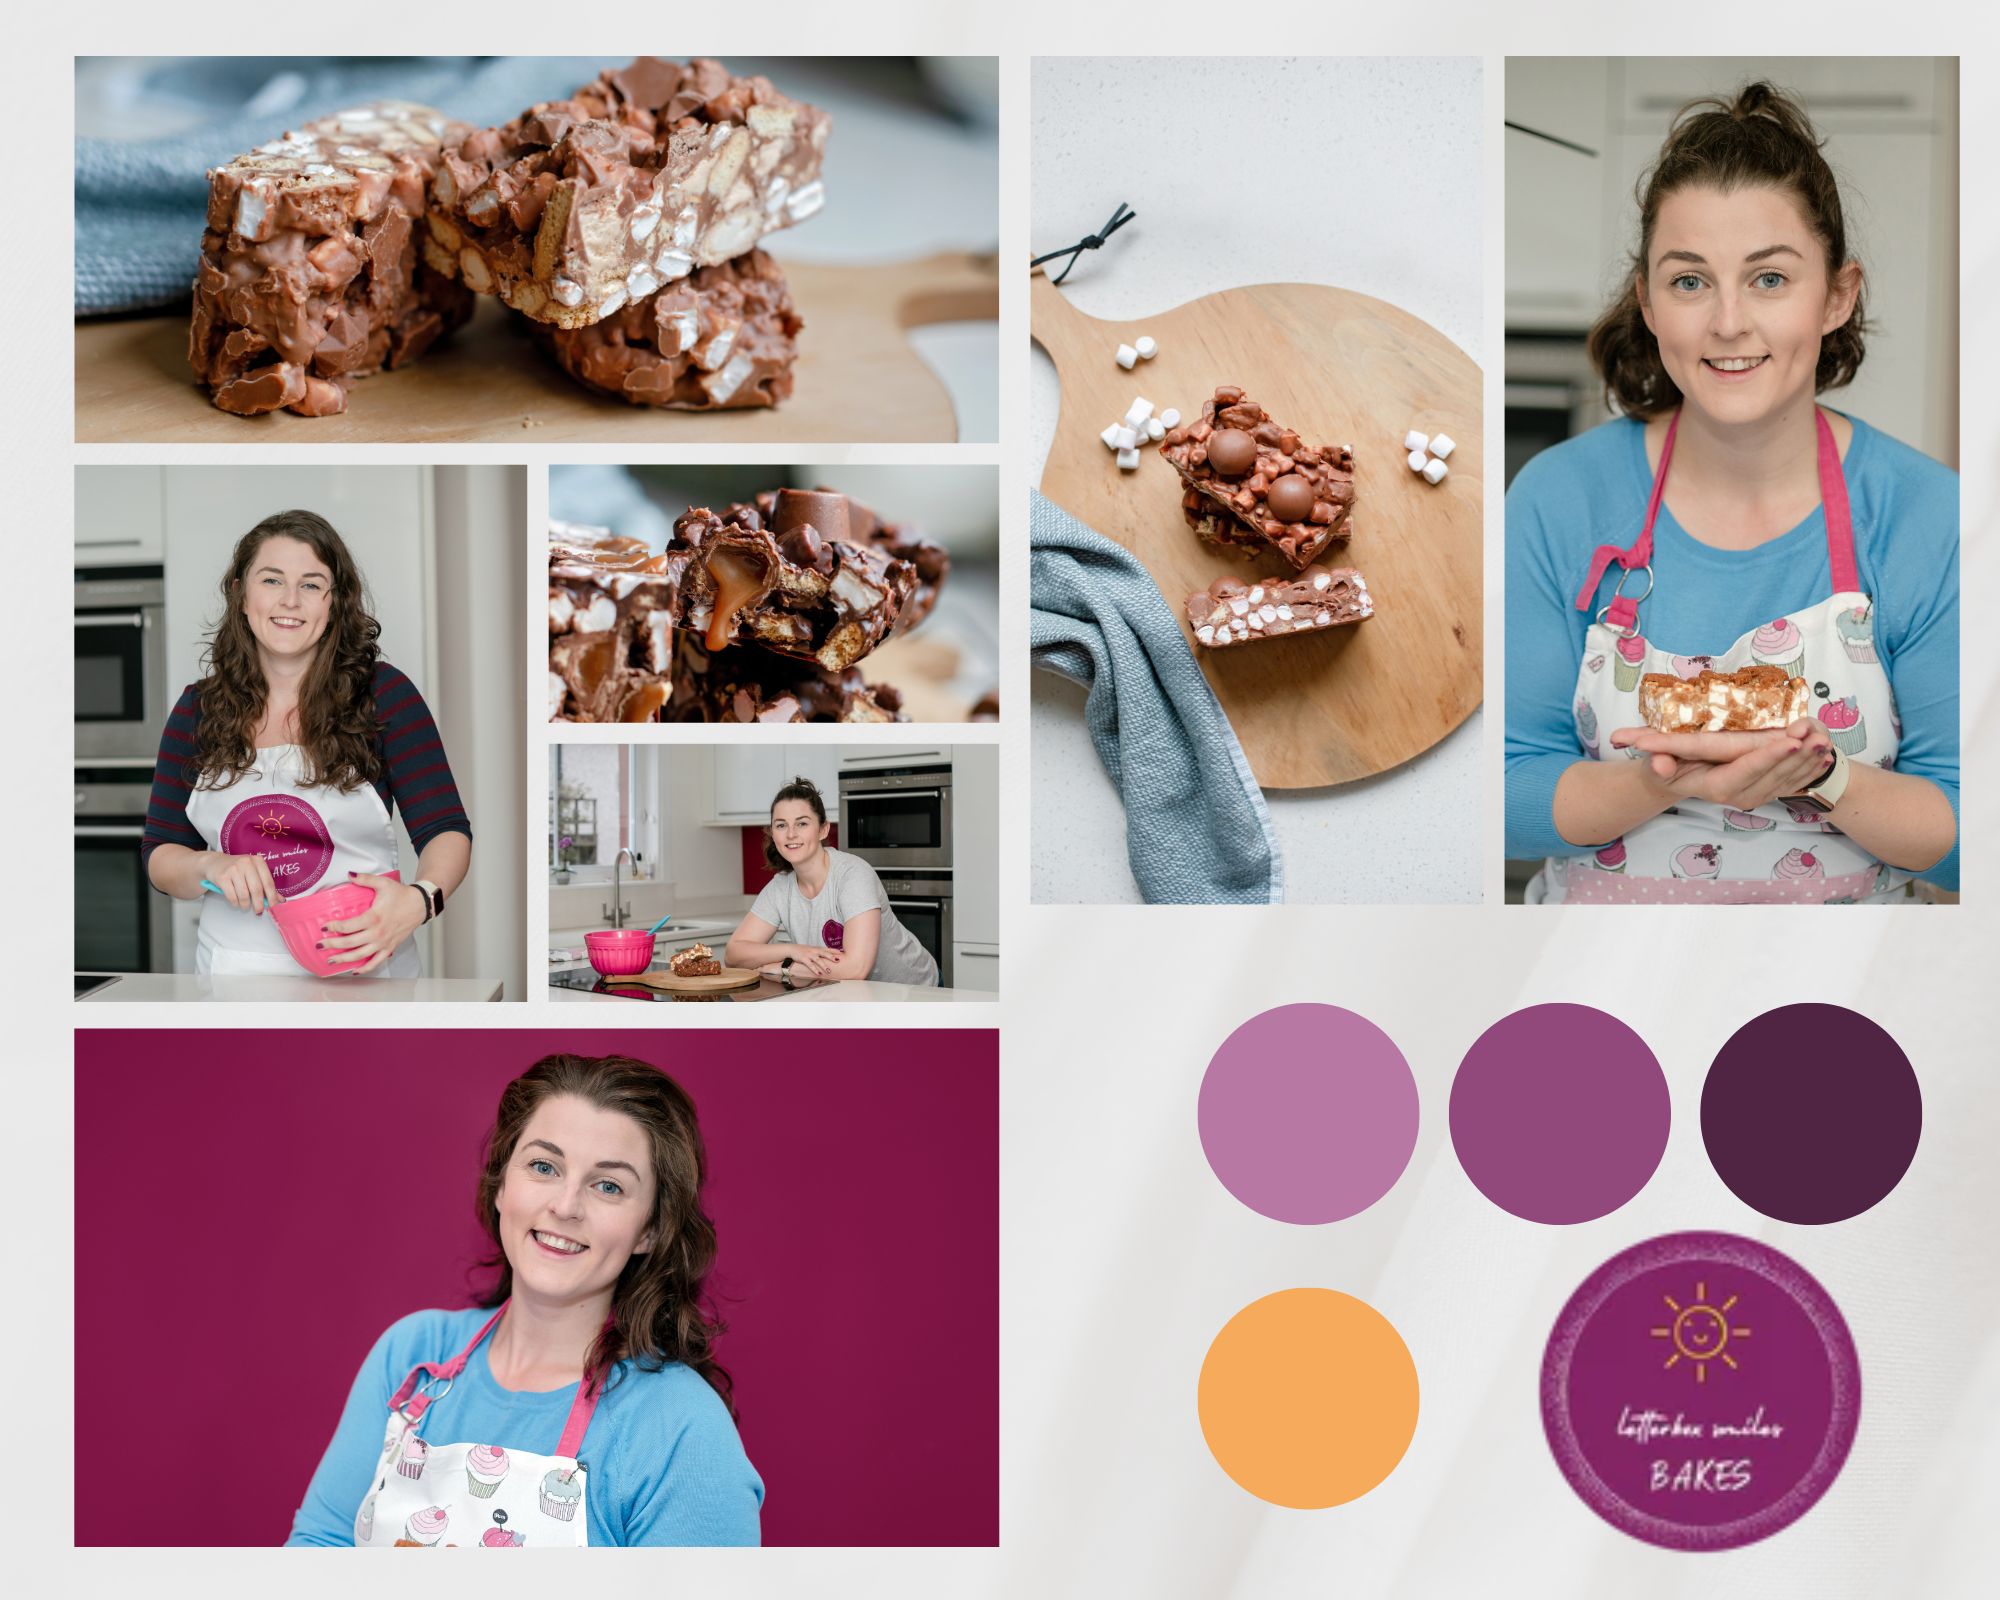 mood board of images for letterbox smiles bakes brand photography